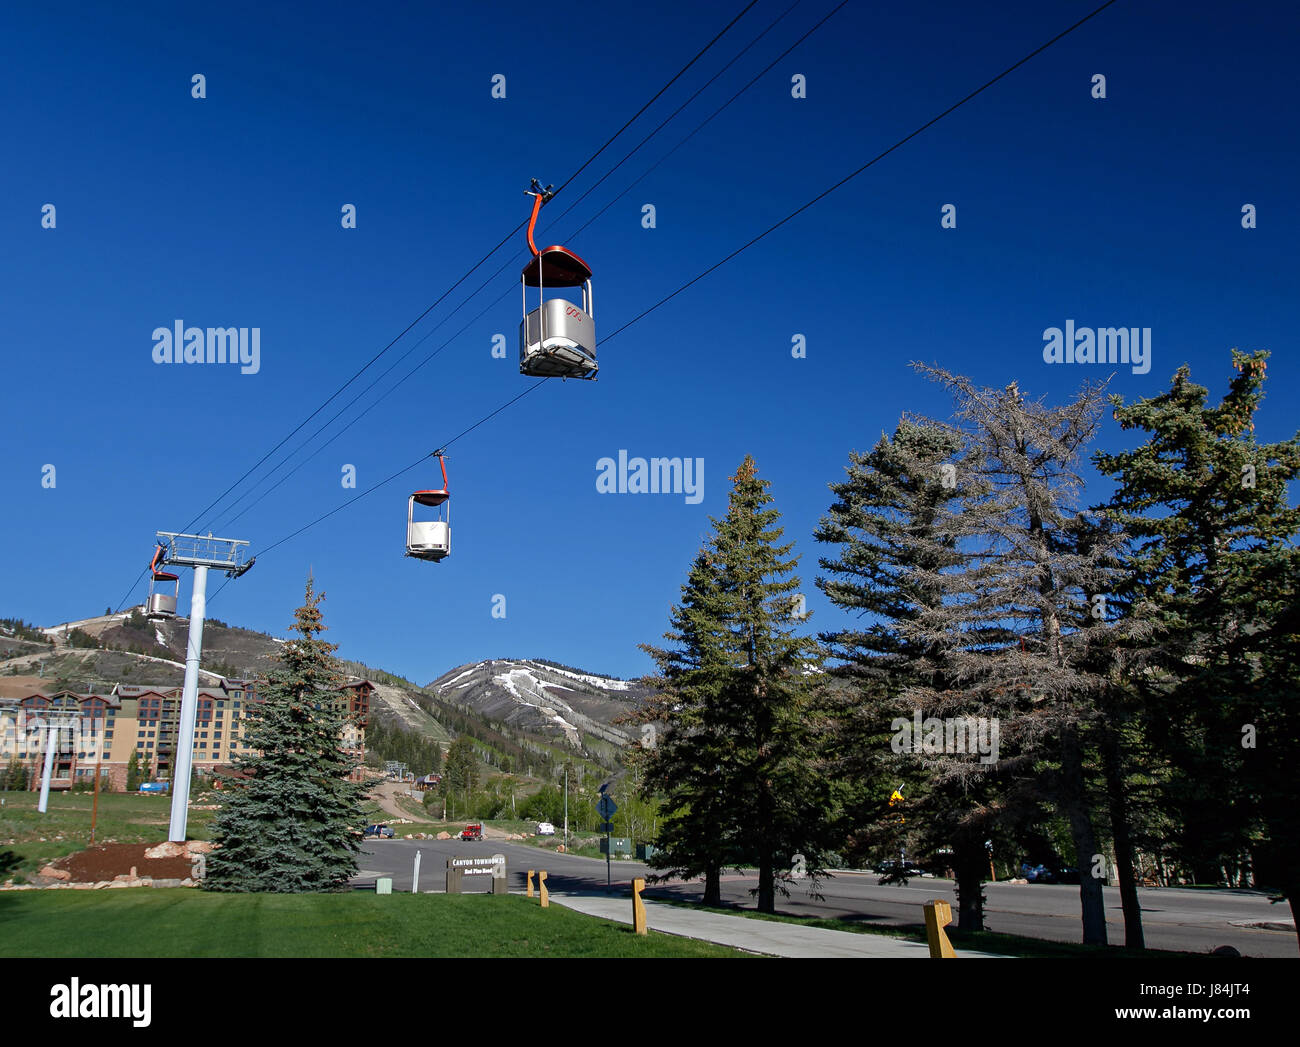 Park City, UT, May 12, 2017: Cabins of the Cabriolet lift in Canyons resort are suspended in the air. The cable lift transports skiers to the mountain Stock Photo